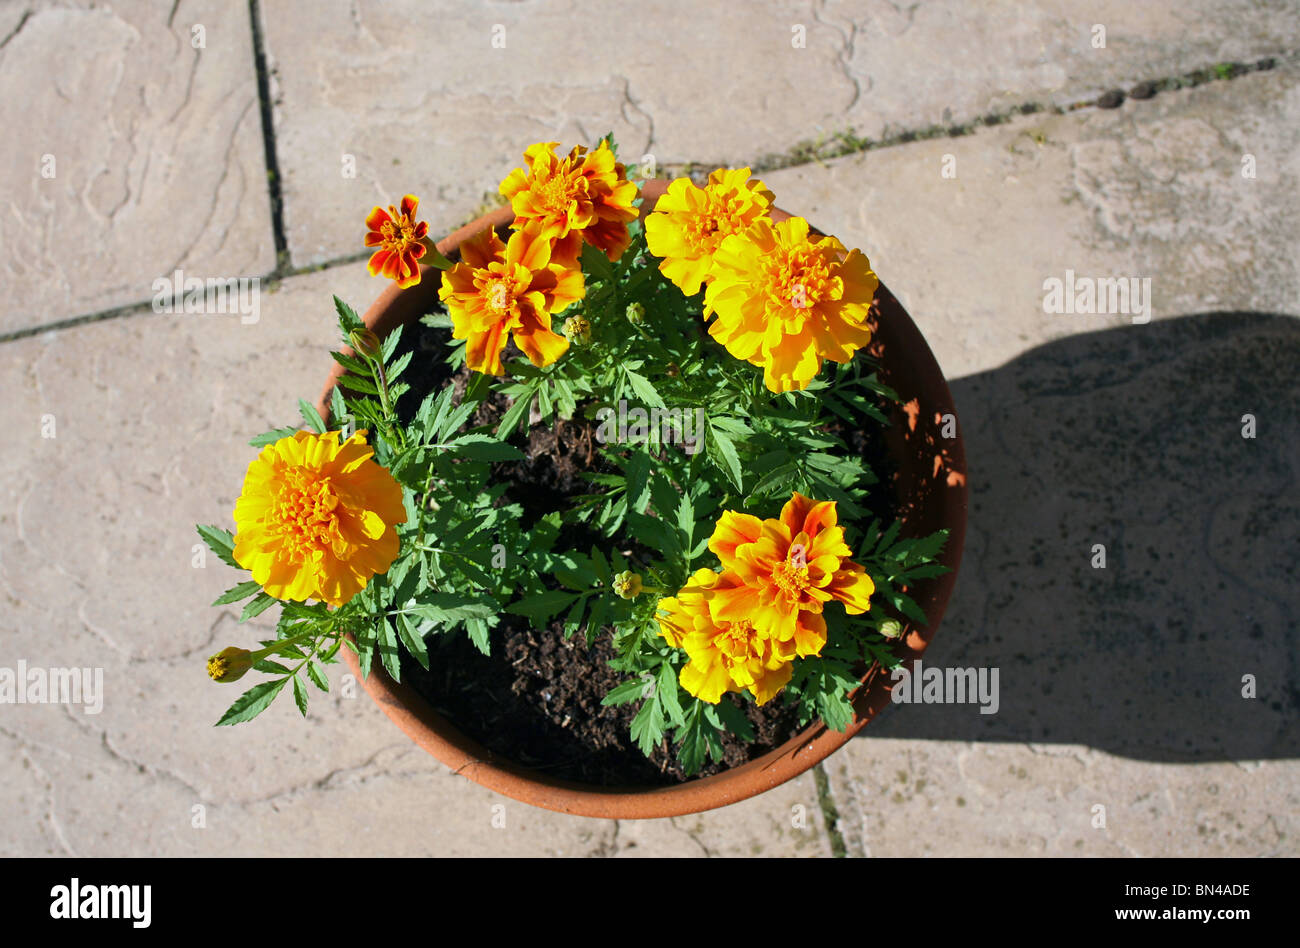 English Country Garden - French Marigolds fair well on a sunny terrace Stock Photo